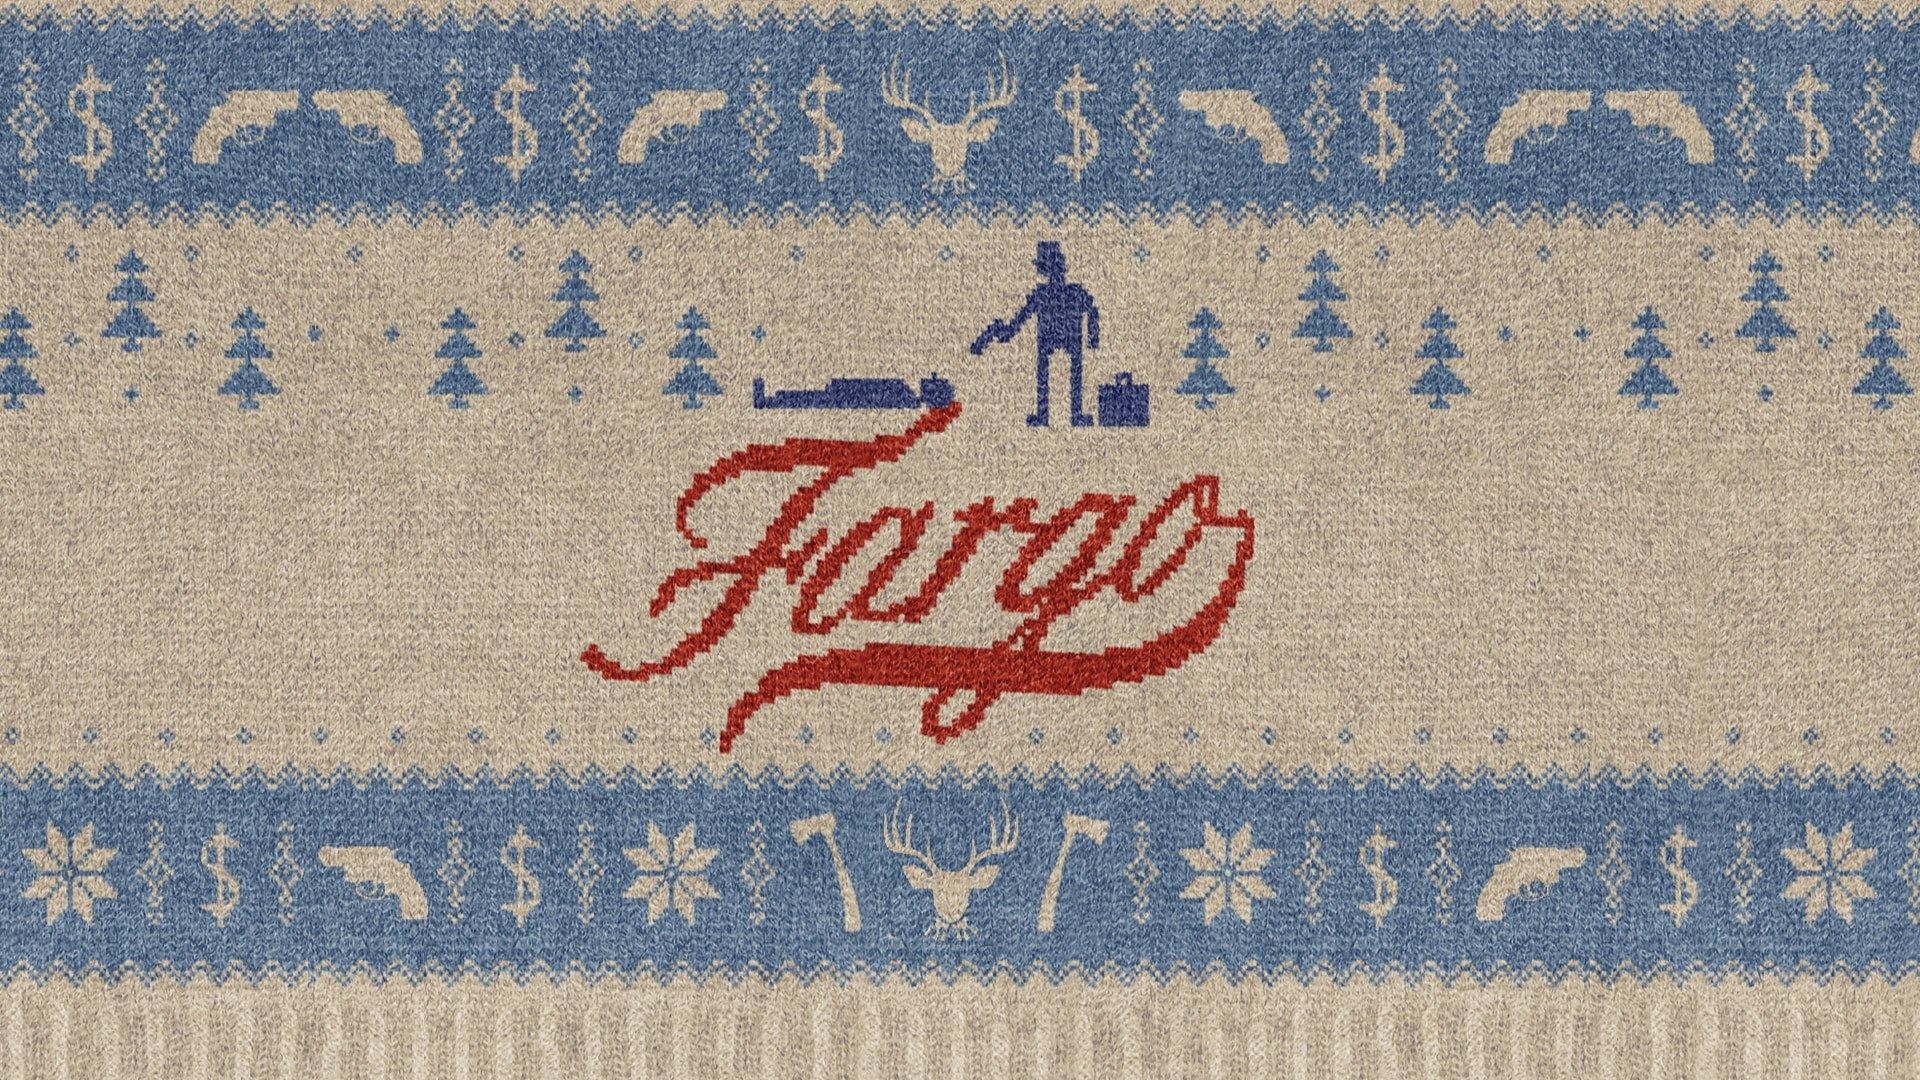 Fargo TV show, HD wallpapers, Gripping storyline, Intriguing characters, 1920x1080 Full HD Desktop